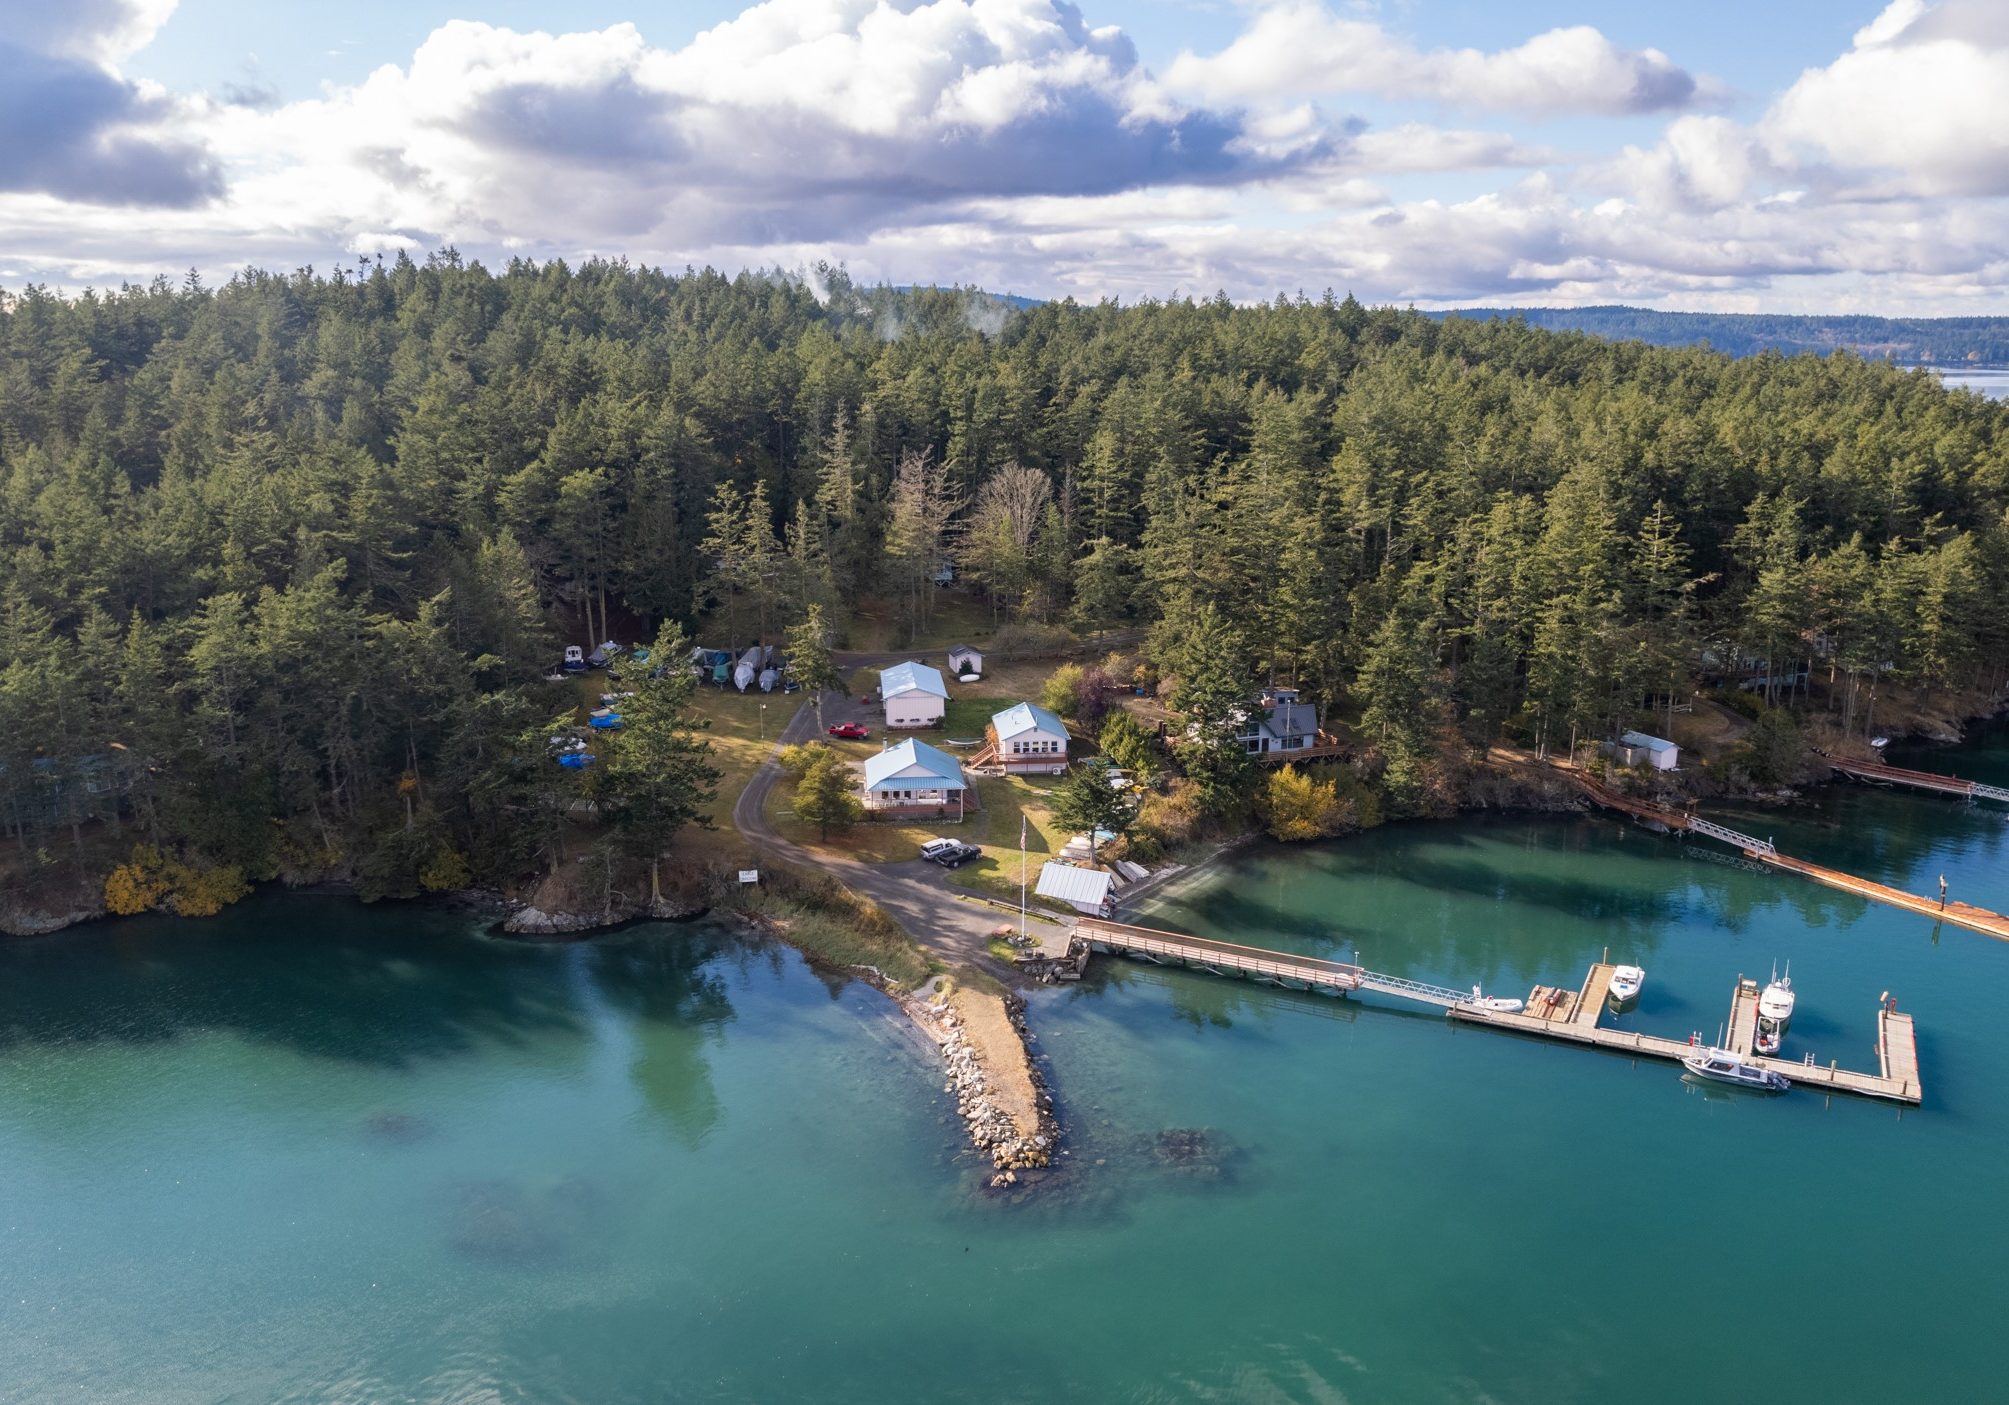 Aeiral view of Center Island from the North. It shows the club house, caretakers cabin, community dock and boat launch